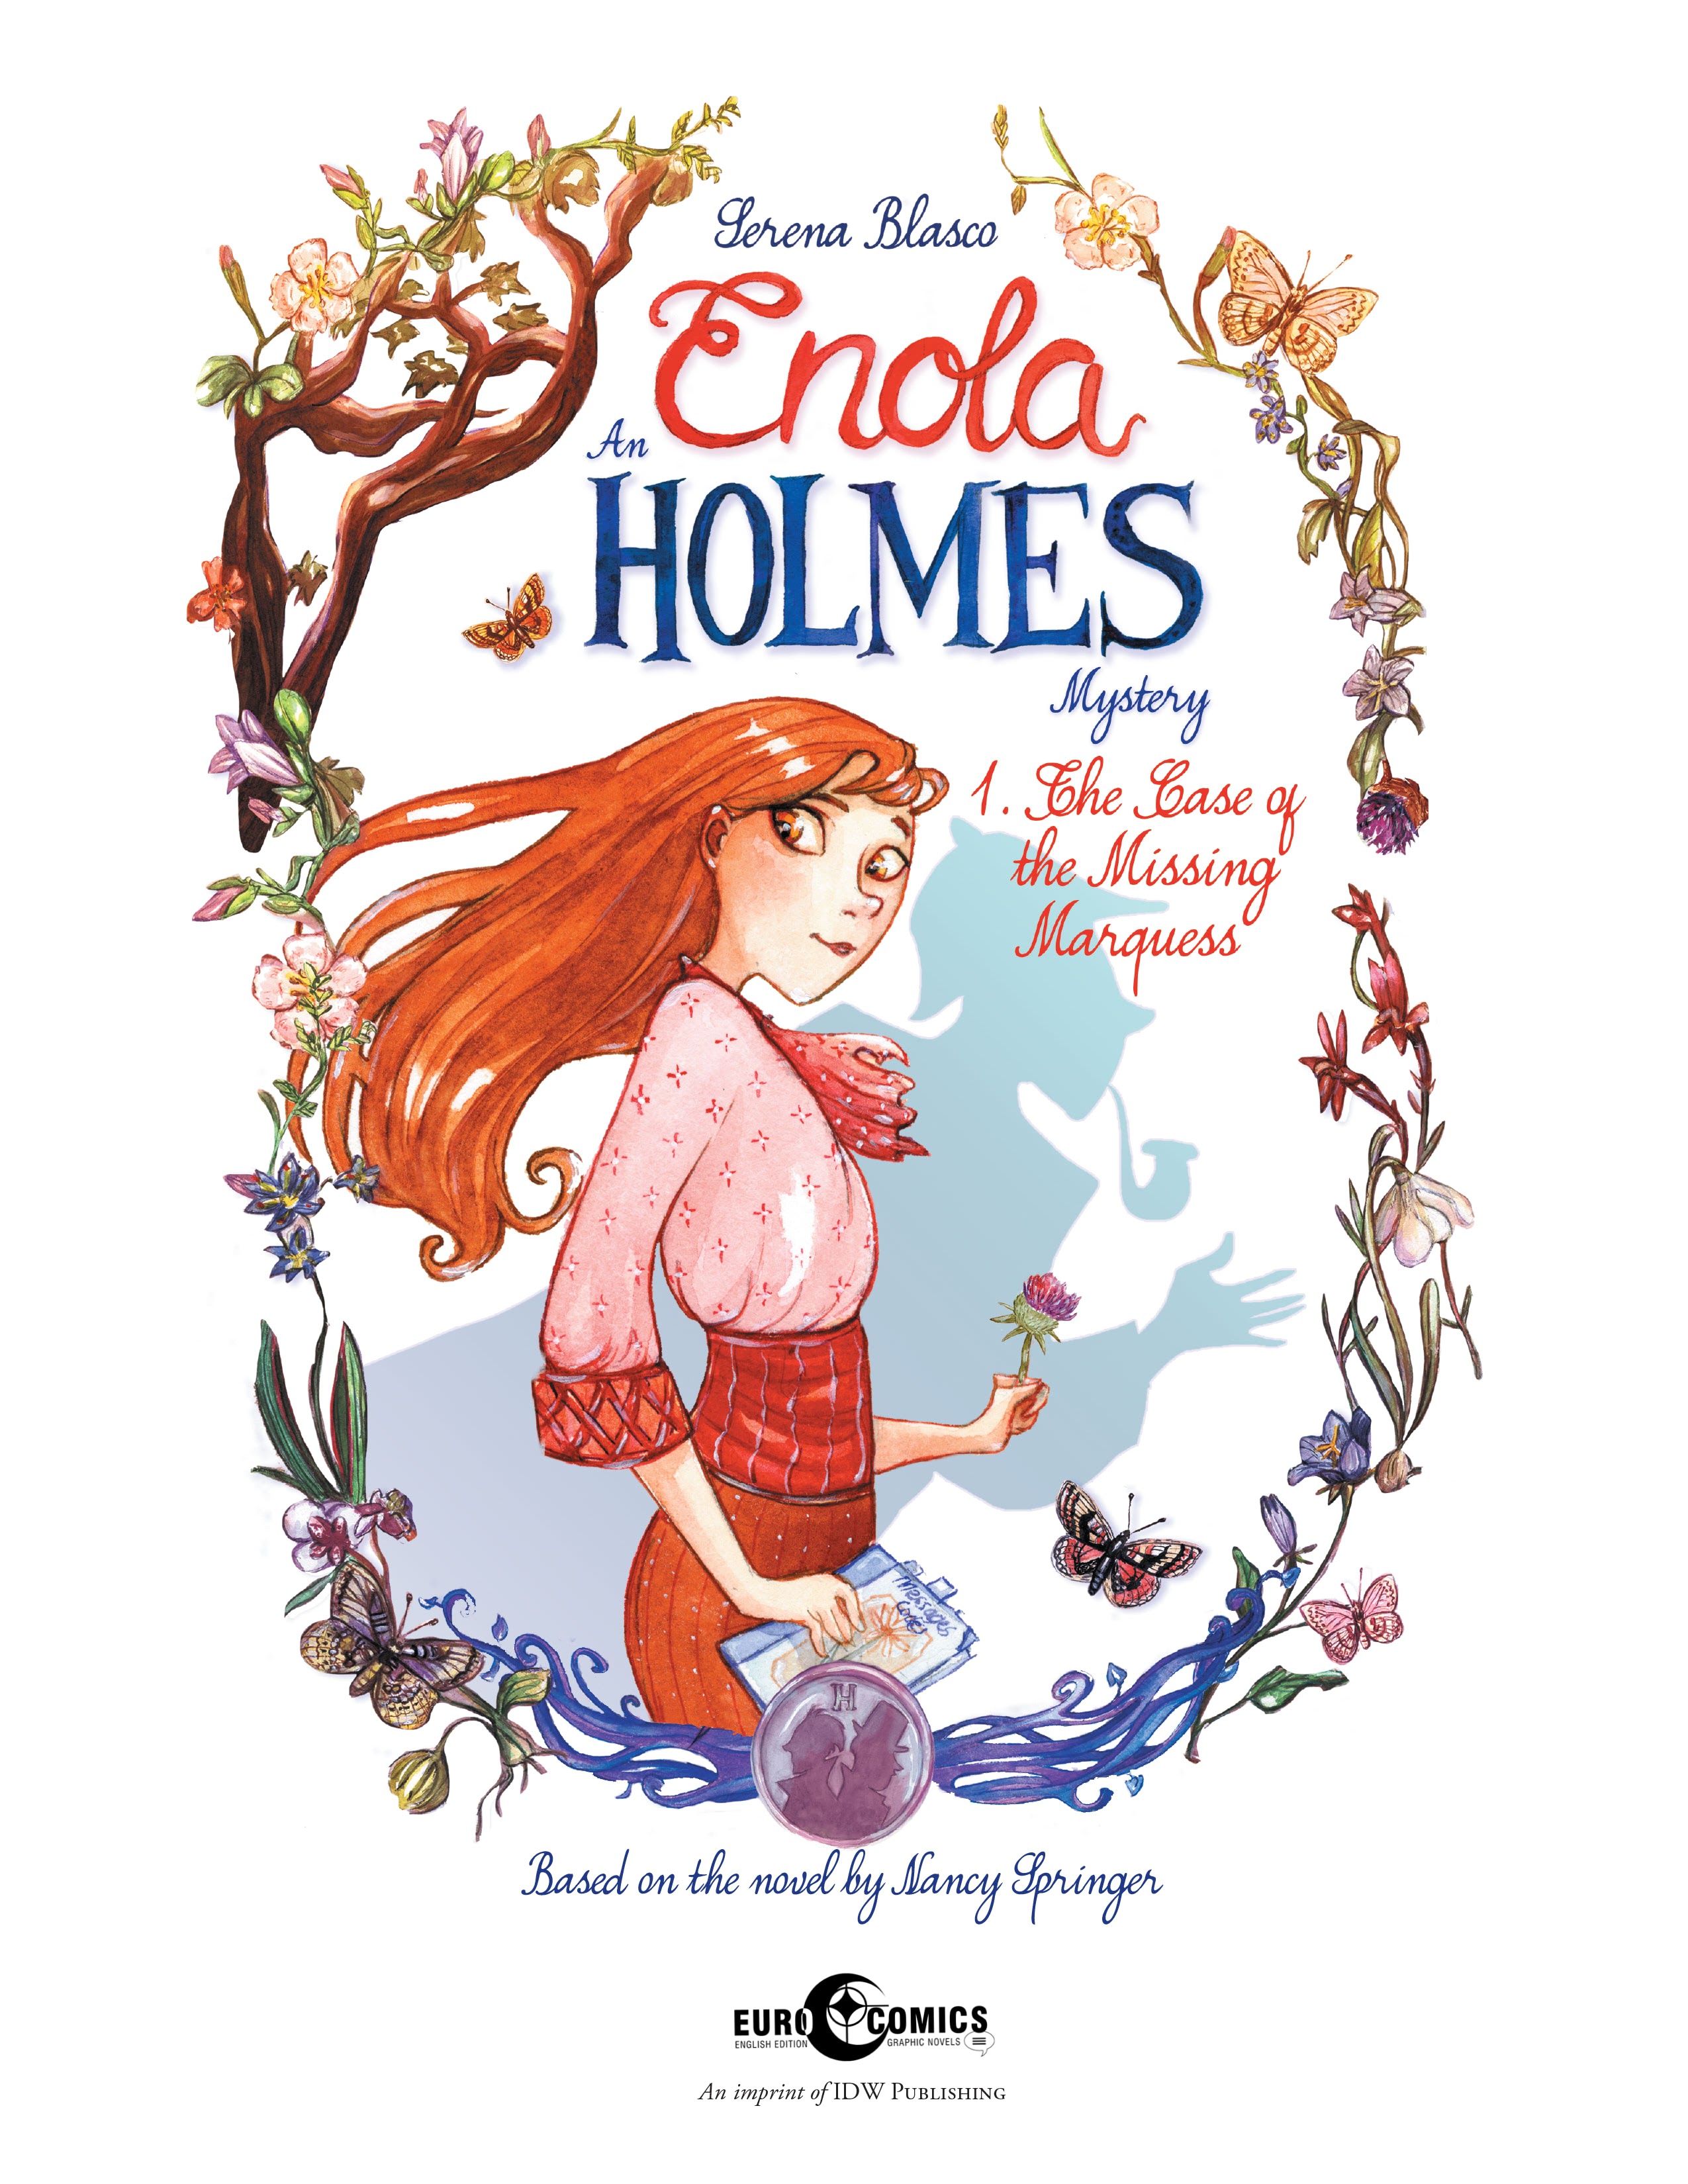 Read online An Enola Holmes Mystery comic -  Issue #1 - 3